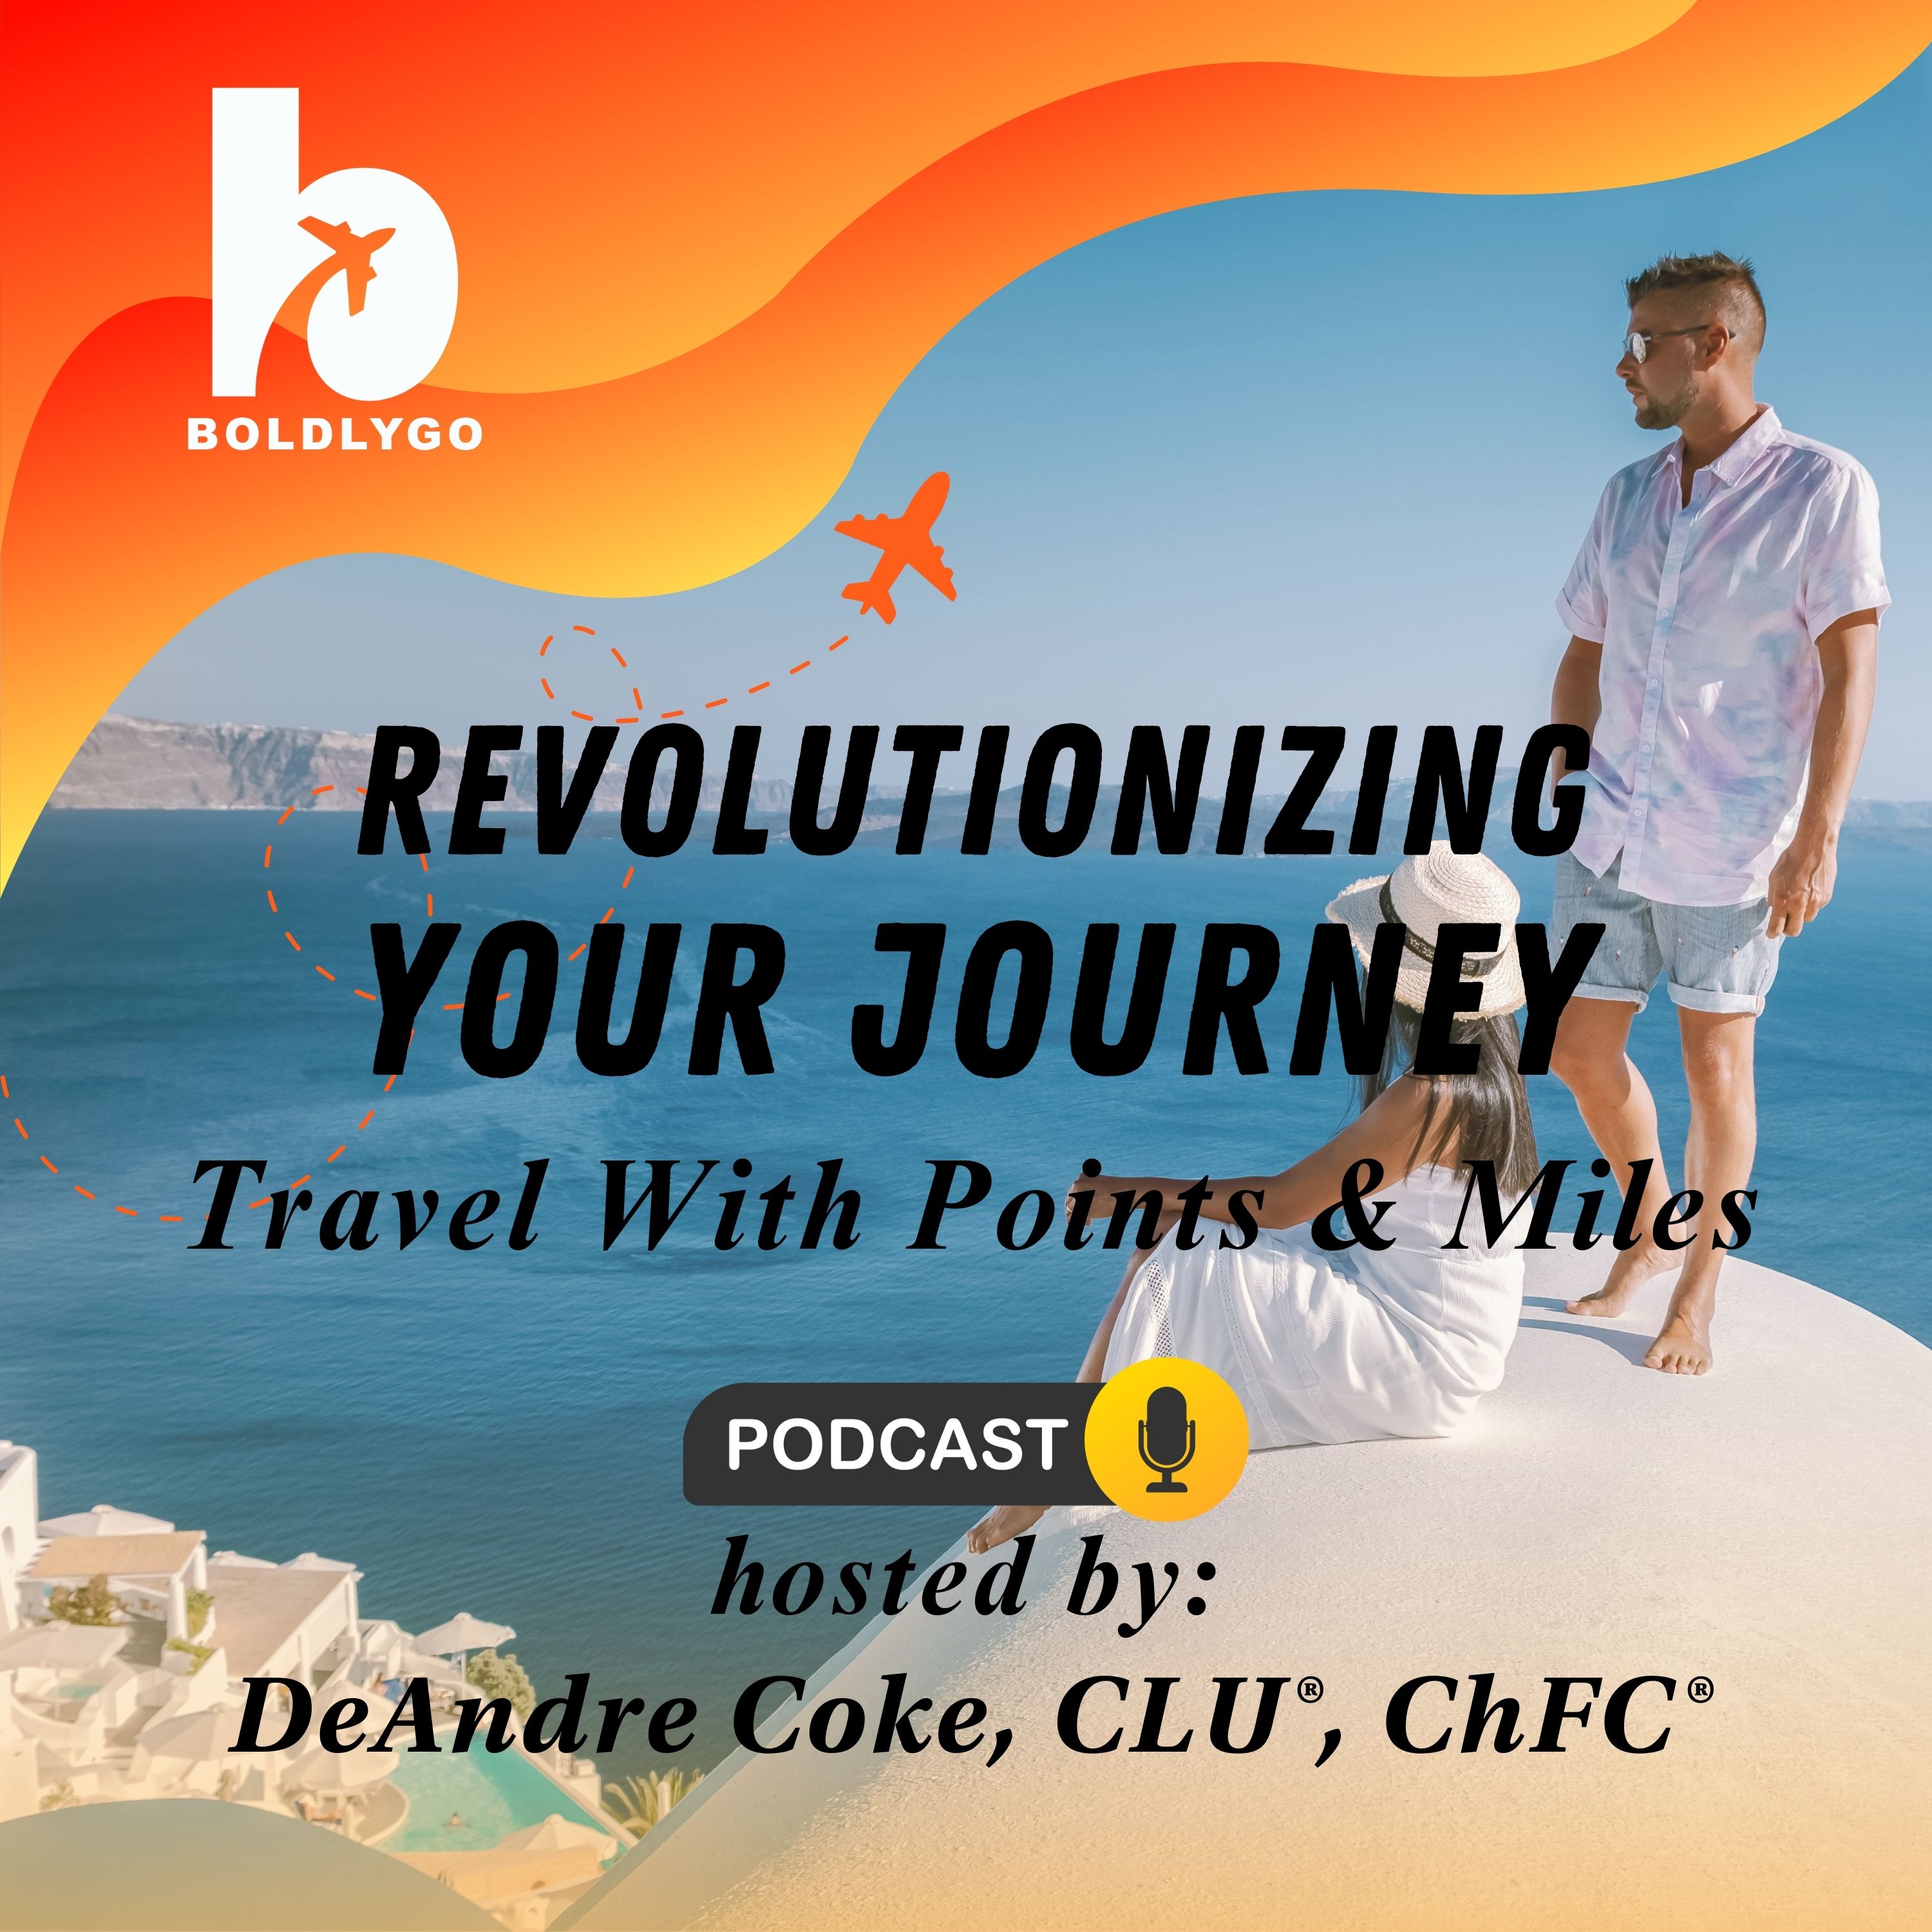 Revolutionizing Your Journey: Travel With Points & Miles